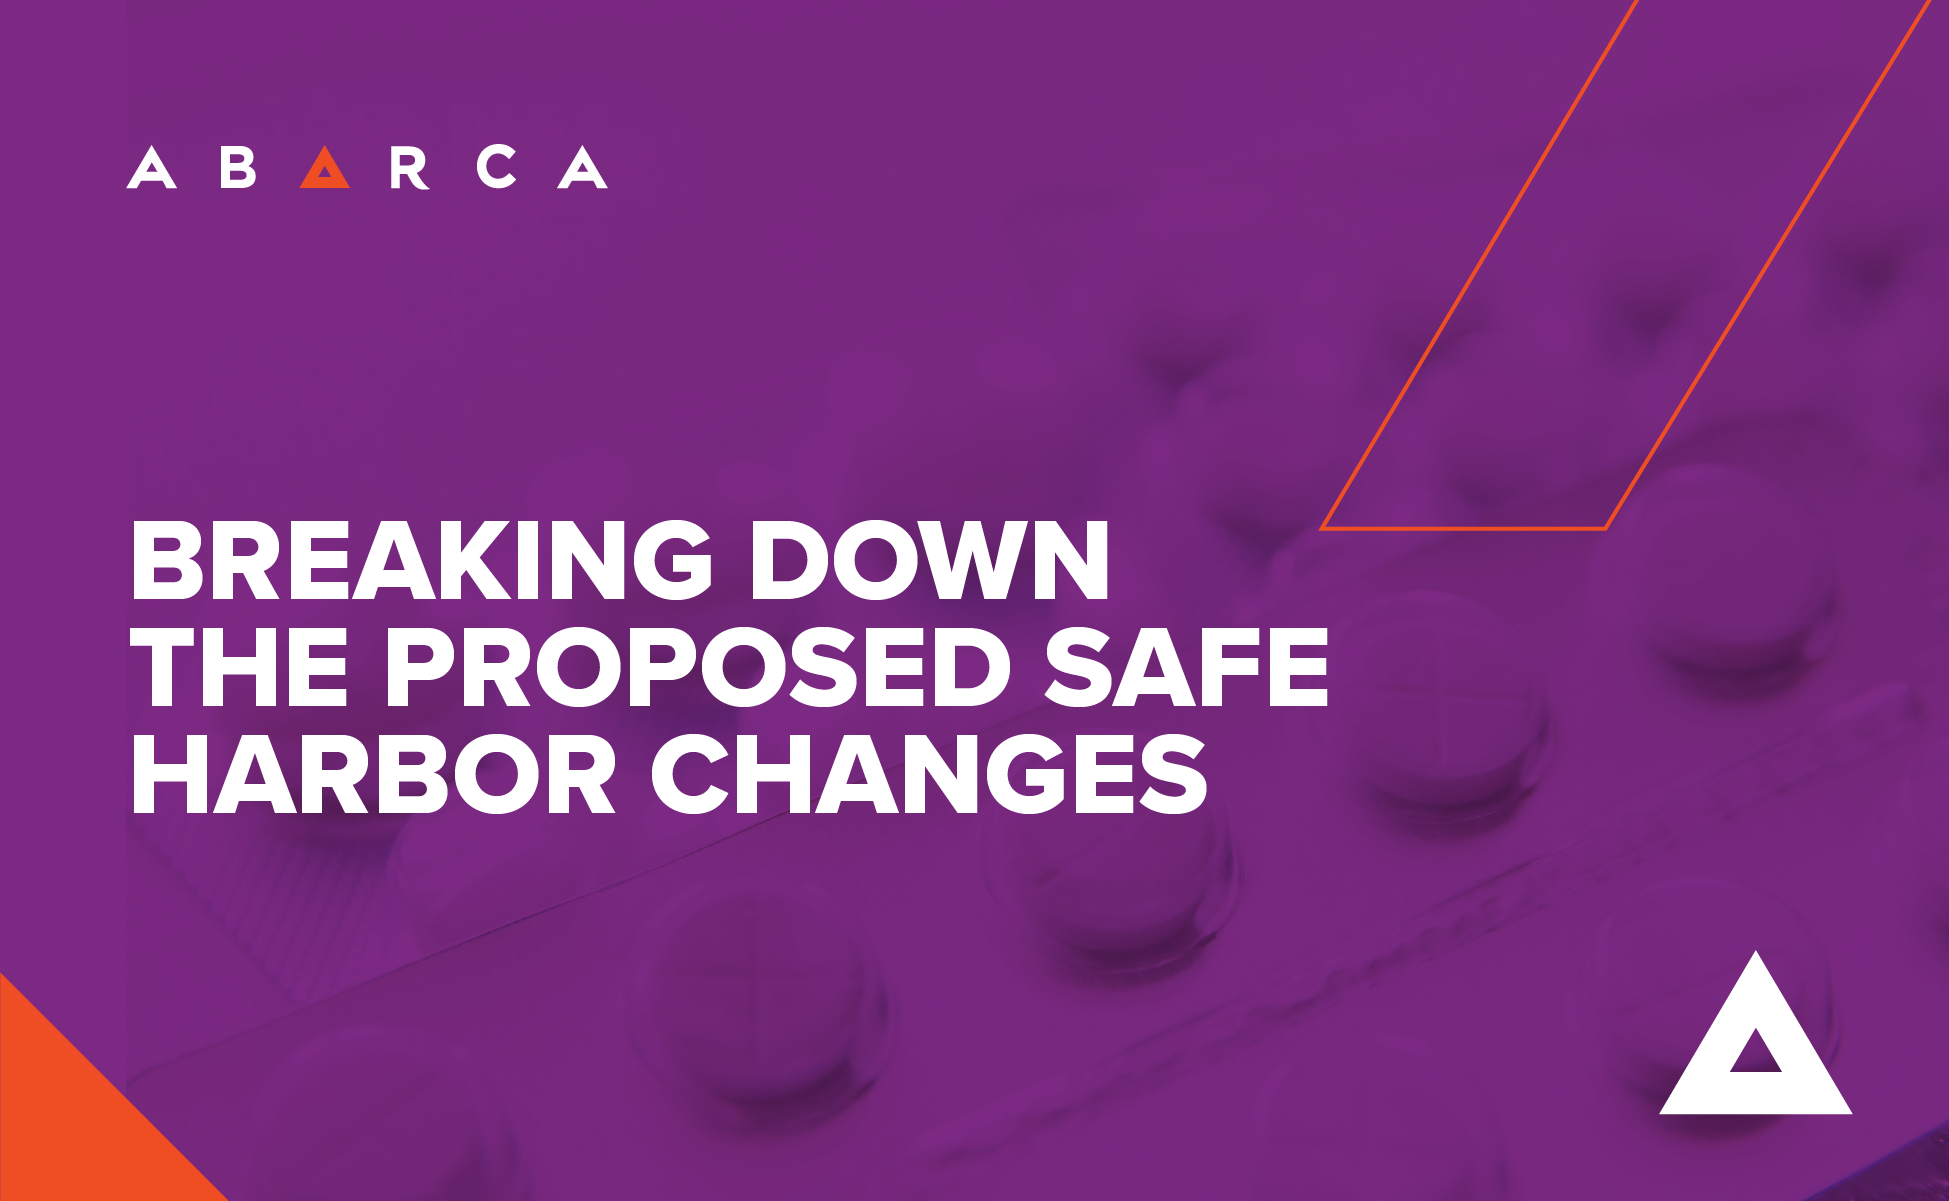 Abarca Health is breaking down the proposed safe harbor changes